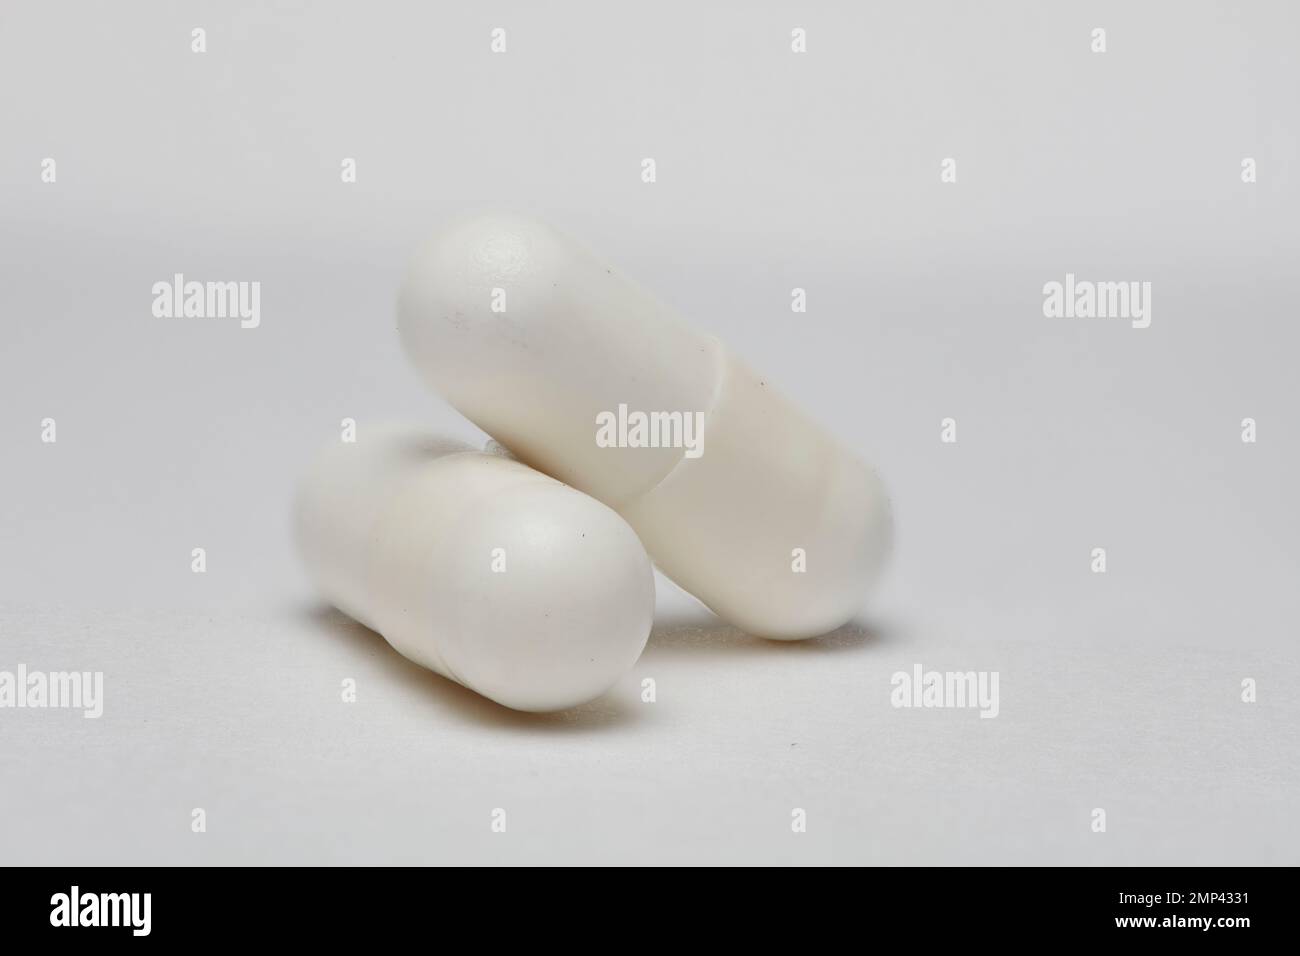 two pills white capsule medication nutrition chemical health doctor prescribe wellbeing clinic hospital Harley Street cut-out high resolution medicine Stock Photo